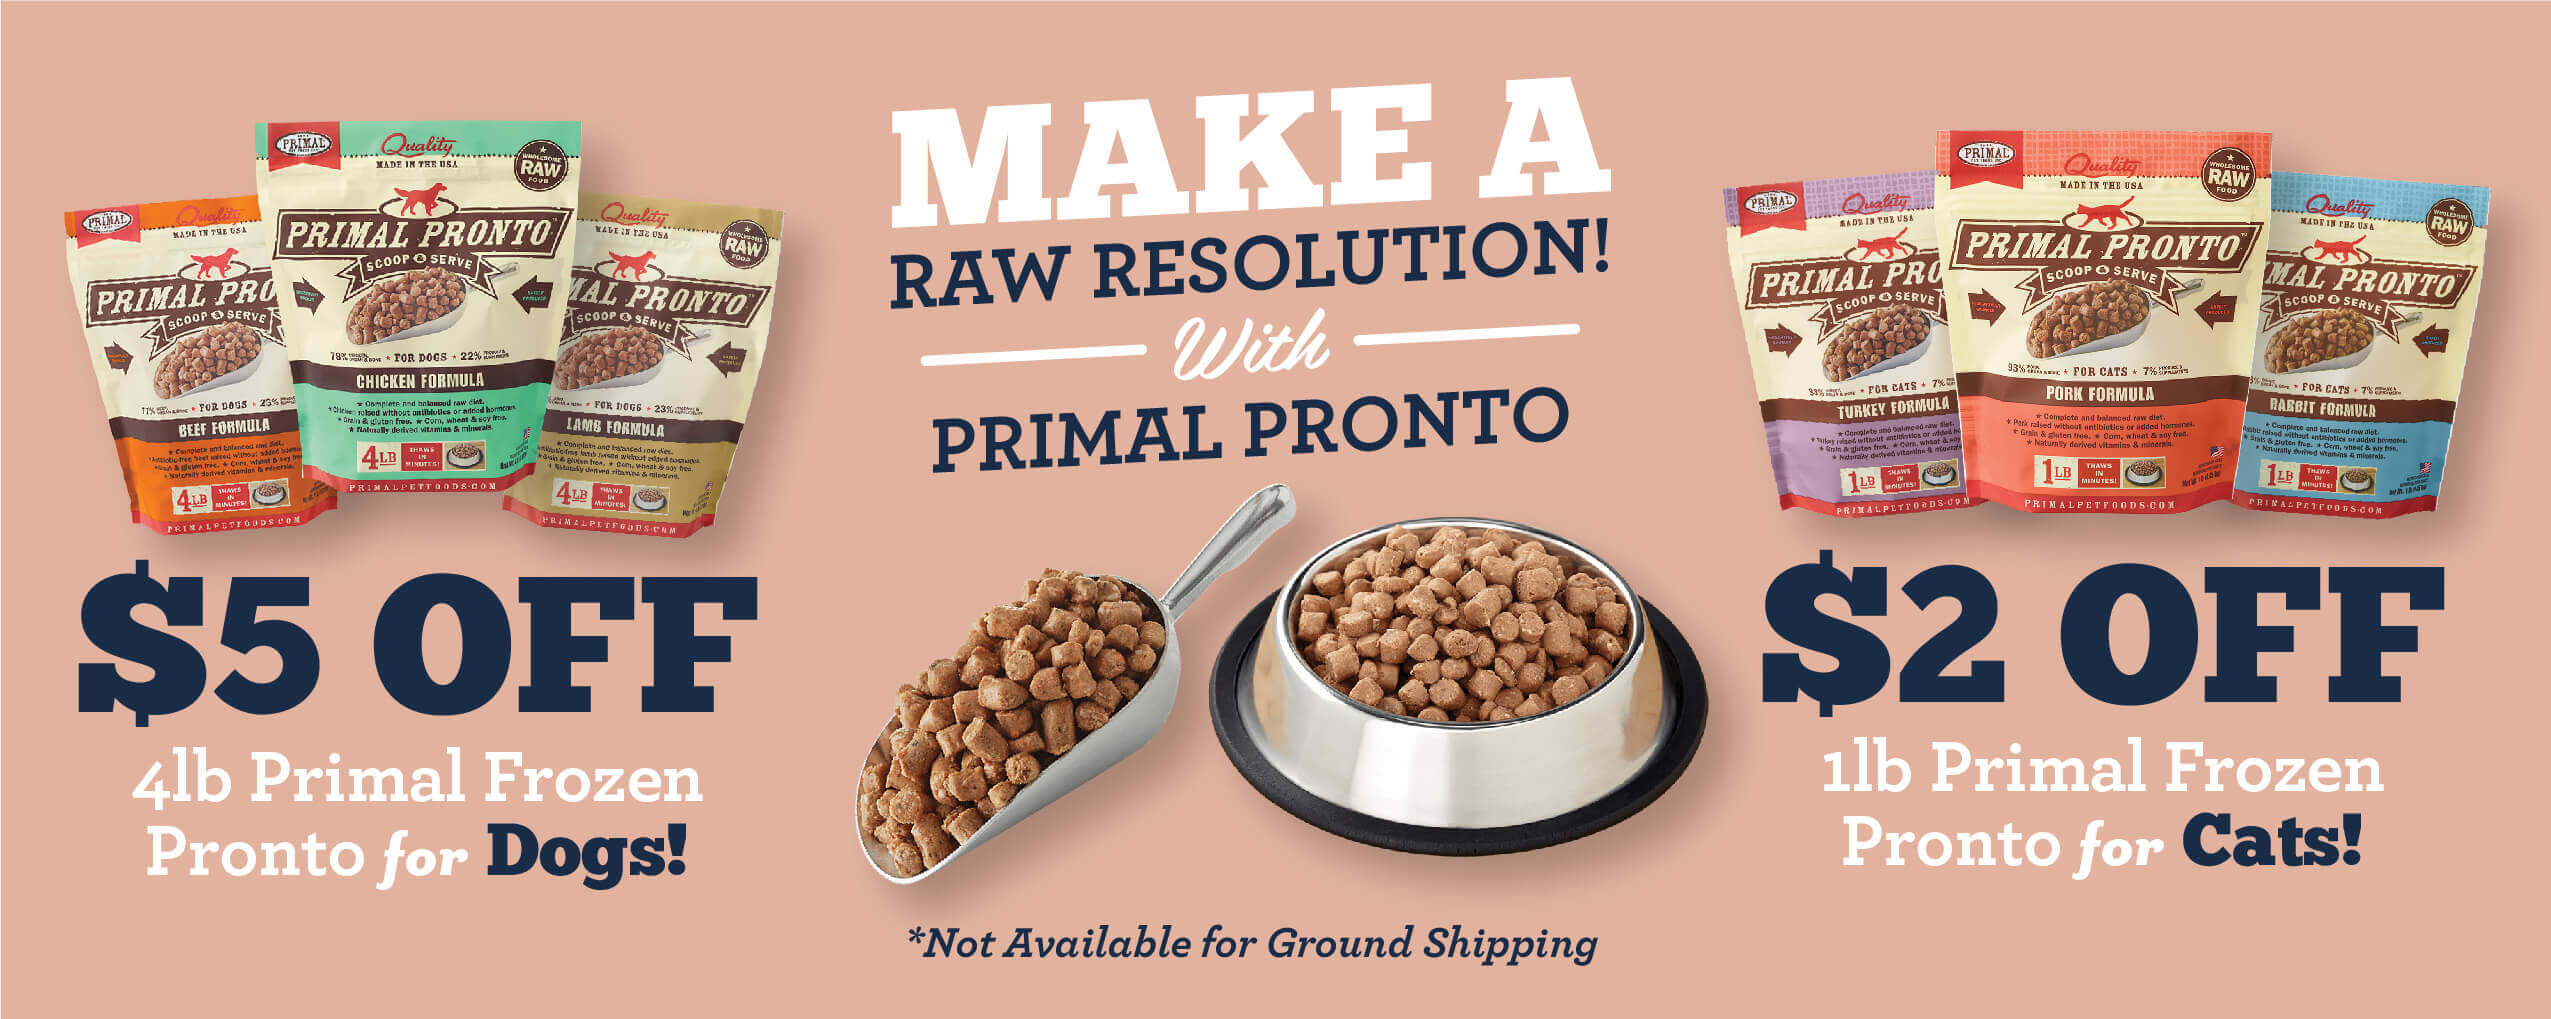 Make a Raw Resolution! $5 Off 4lb Primal Frozen Pronto for Dogs and Cats! *No Standar Shipping